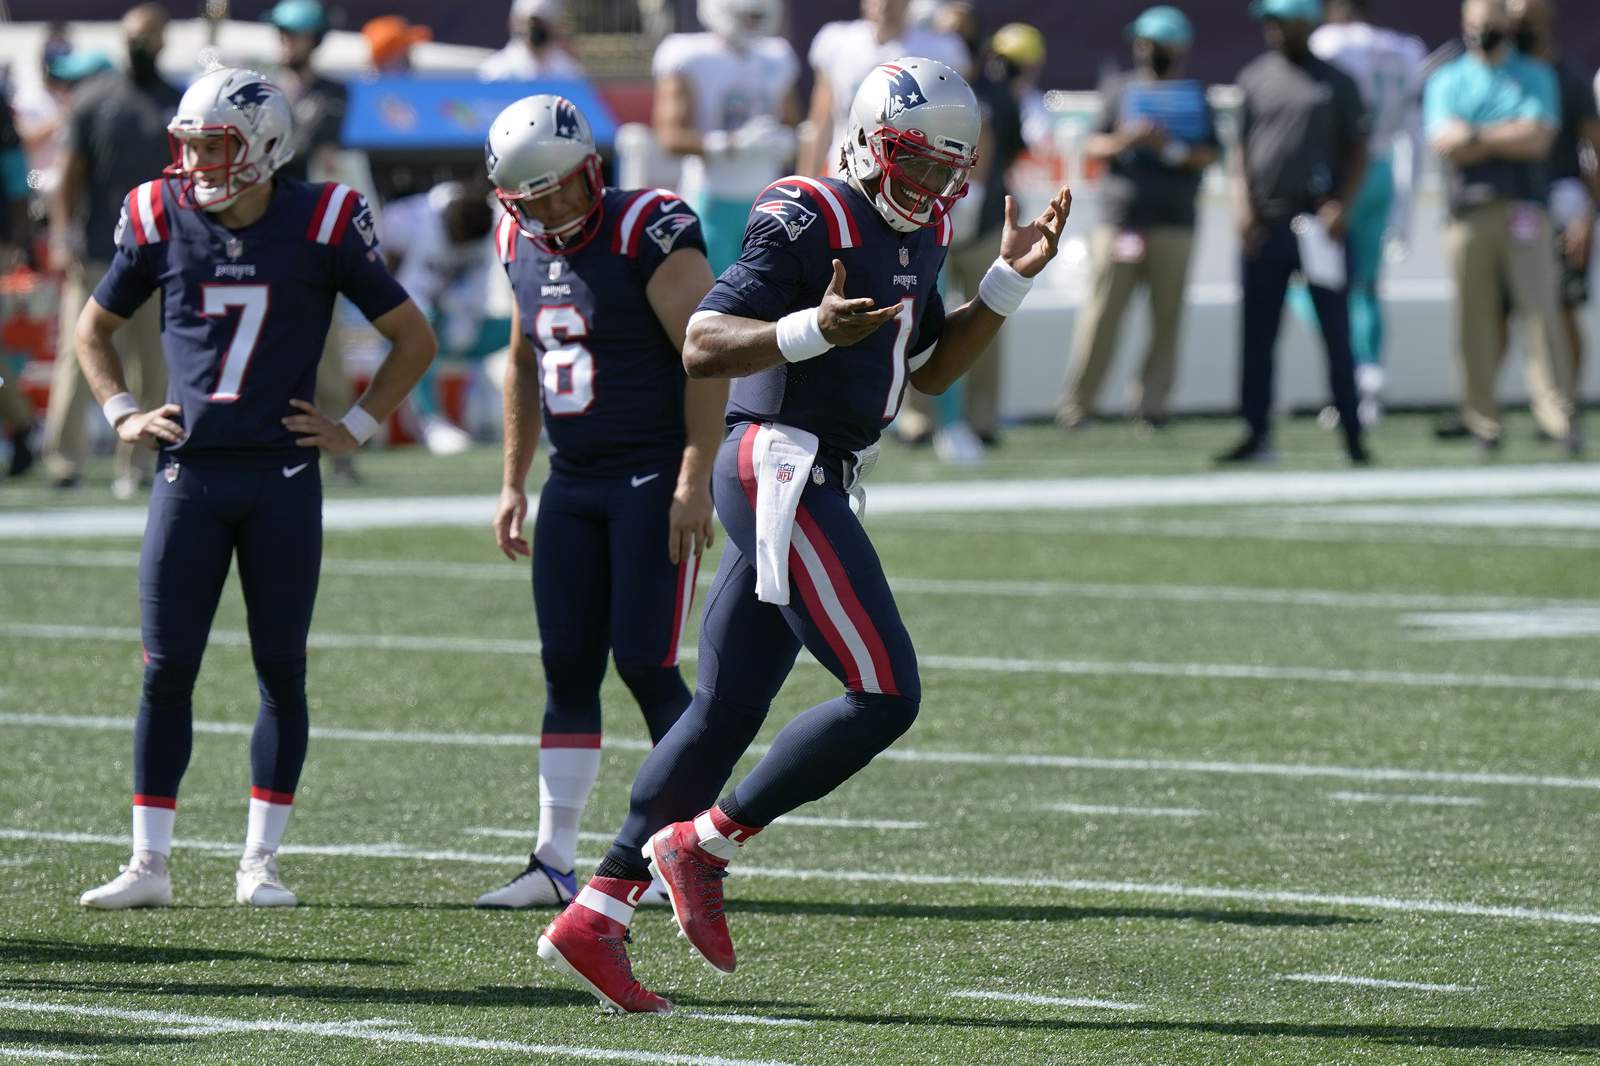 Newton runs for 2 TDs, Patriots hold off Dolphins 21-11